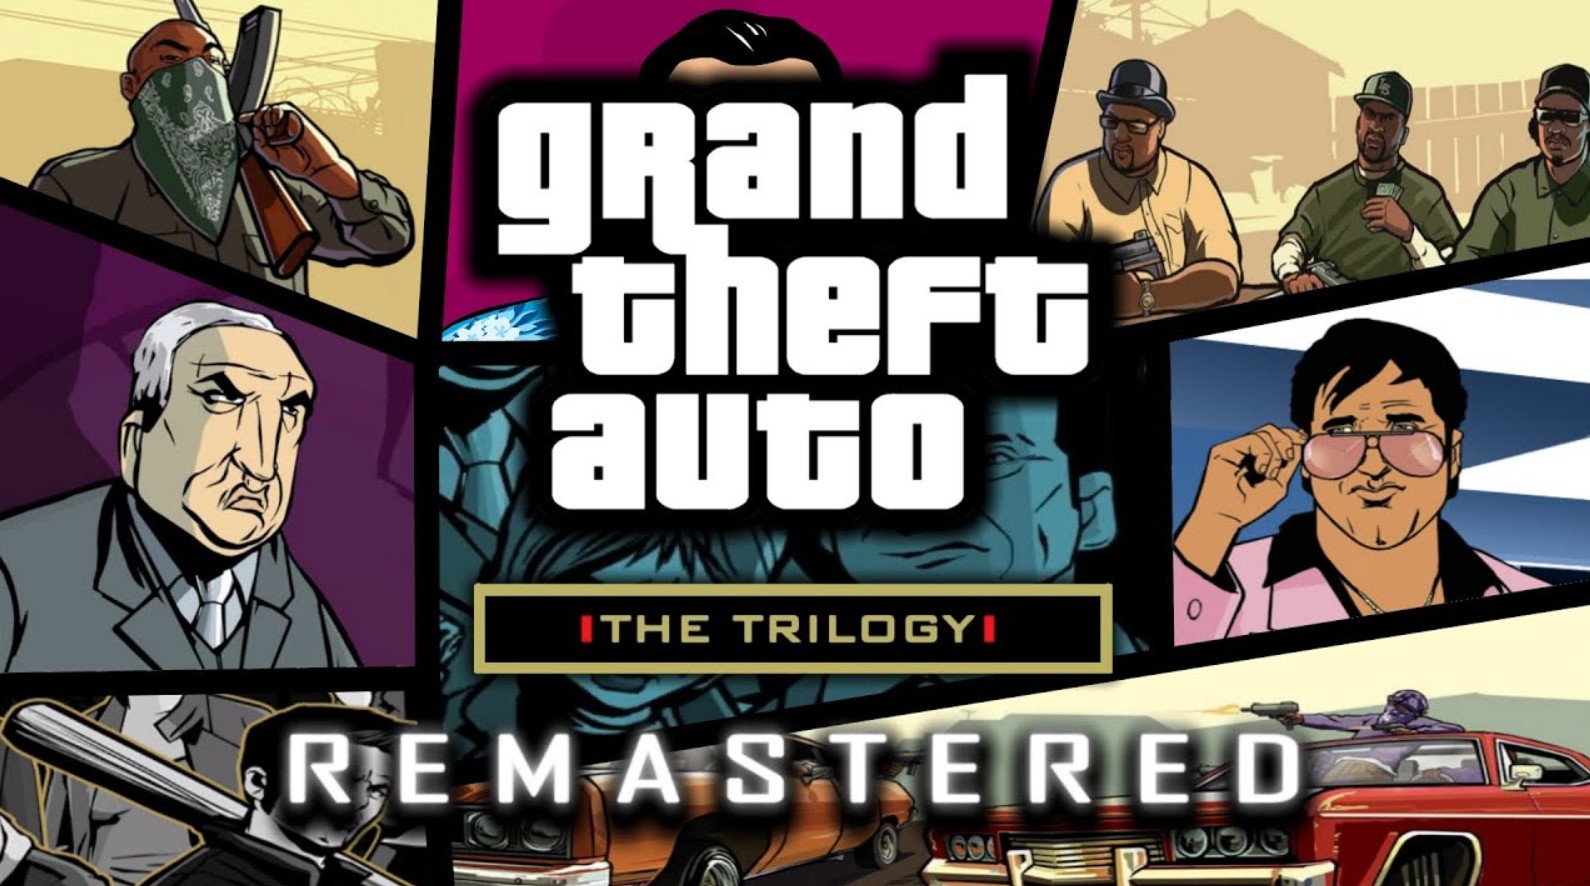 GRAND THEFT AUTO: THE TRILOGY – THE DEFINITIVE EDITION